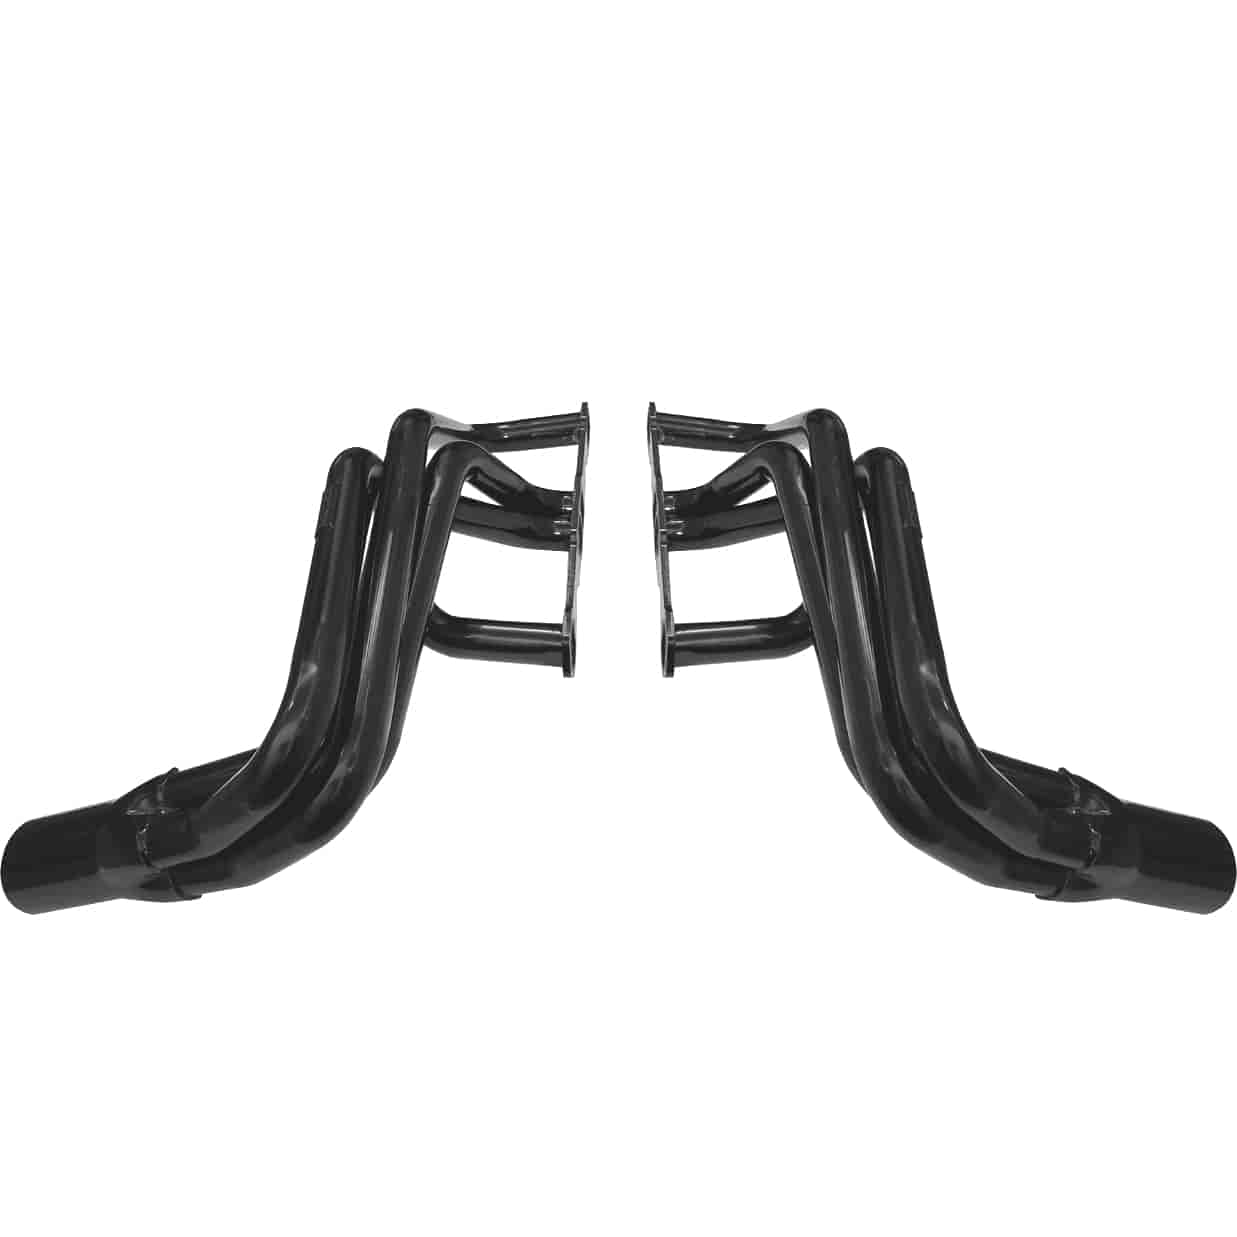 S-10 Truck Forward Exit V8 Conversion Headers - Small Block Chevy - Standard Ports